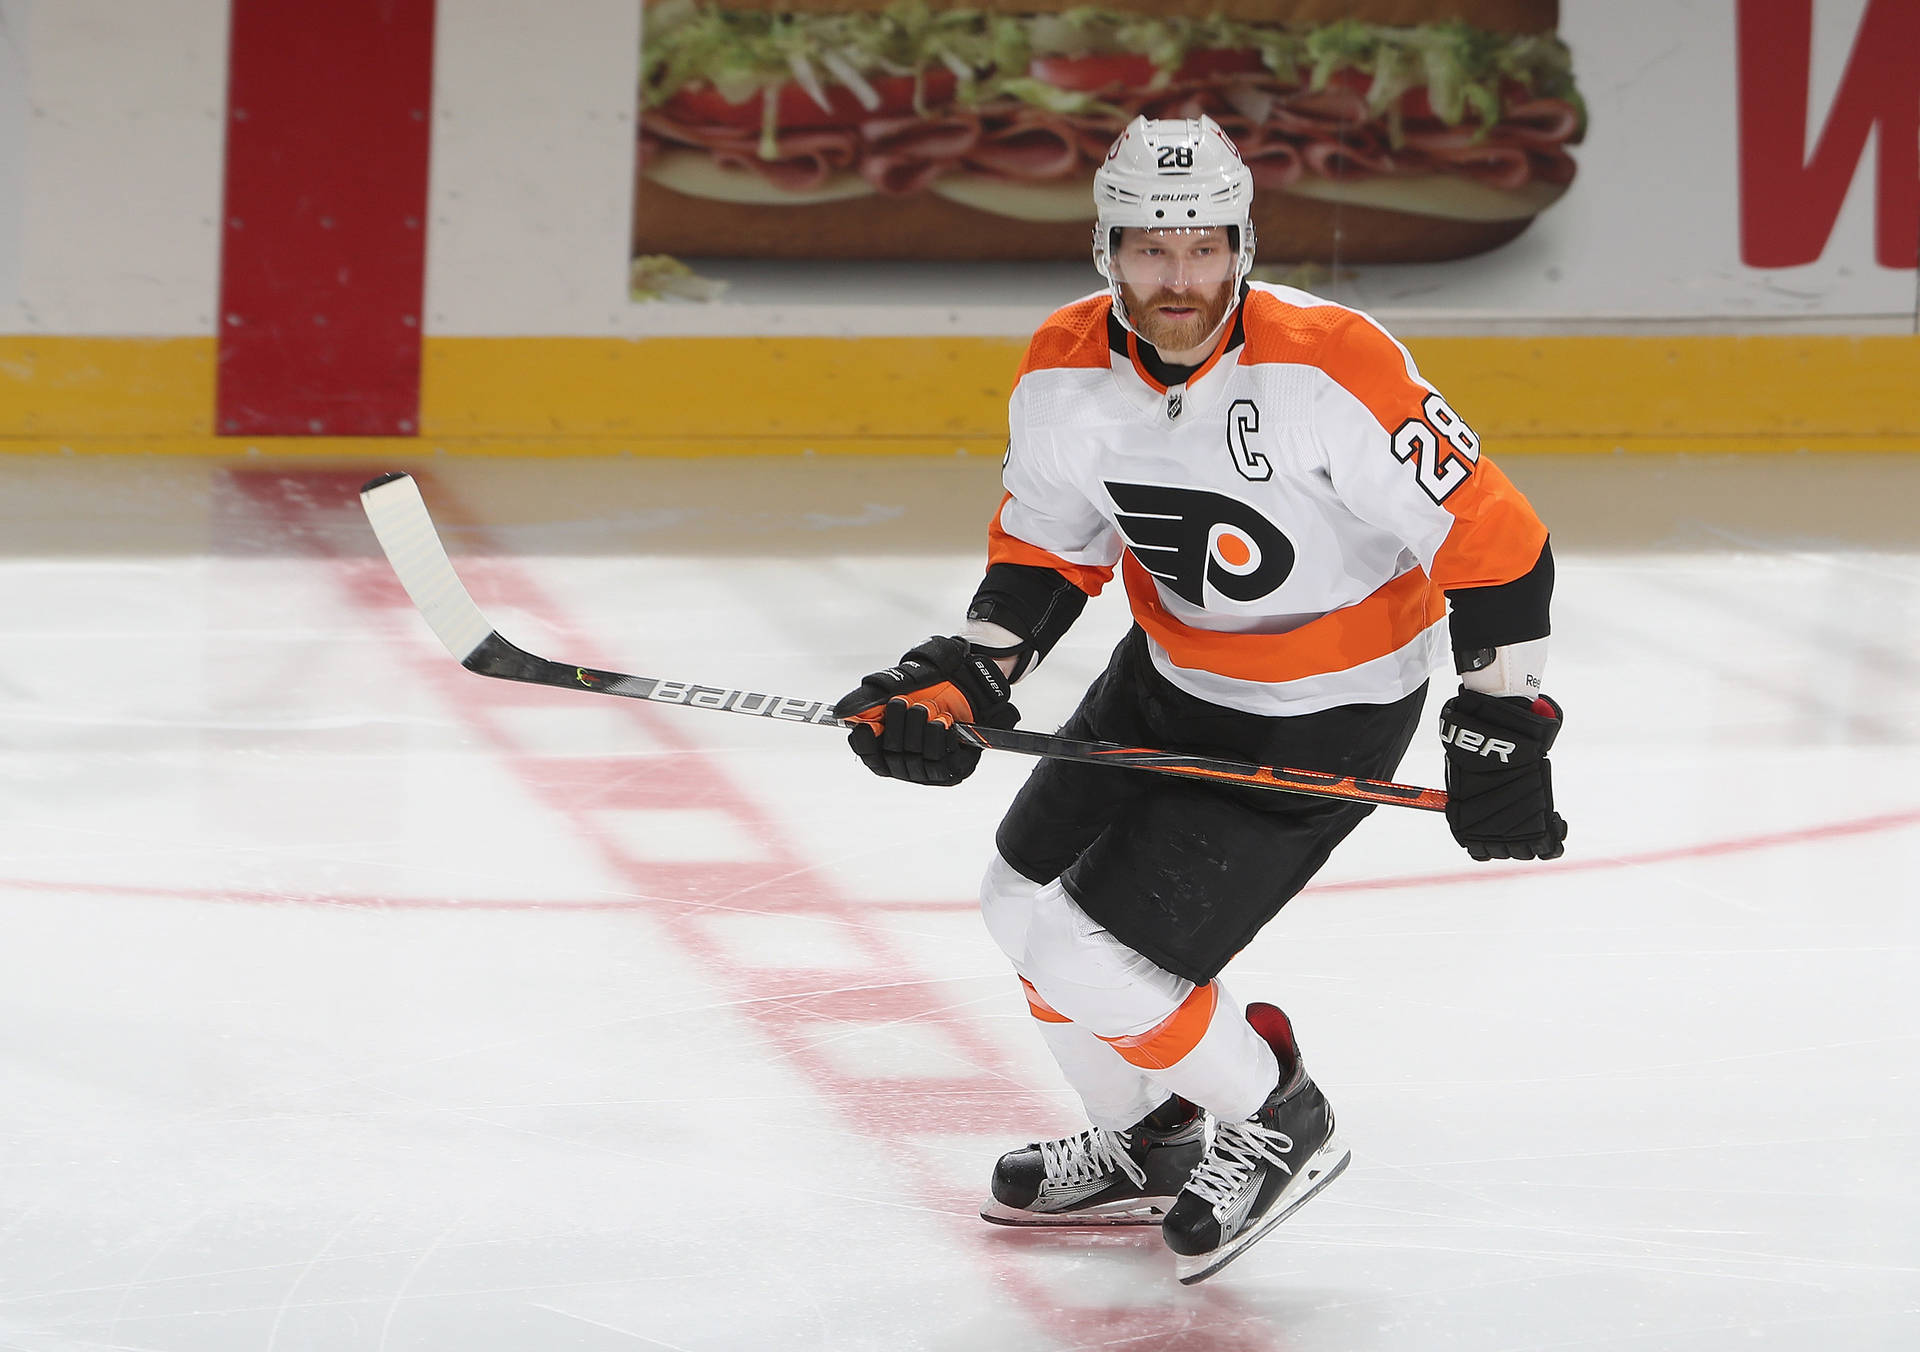 Claude Giroux In Action During An Nhl Game Background